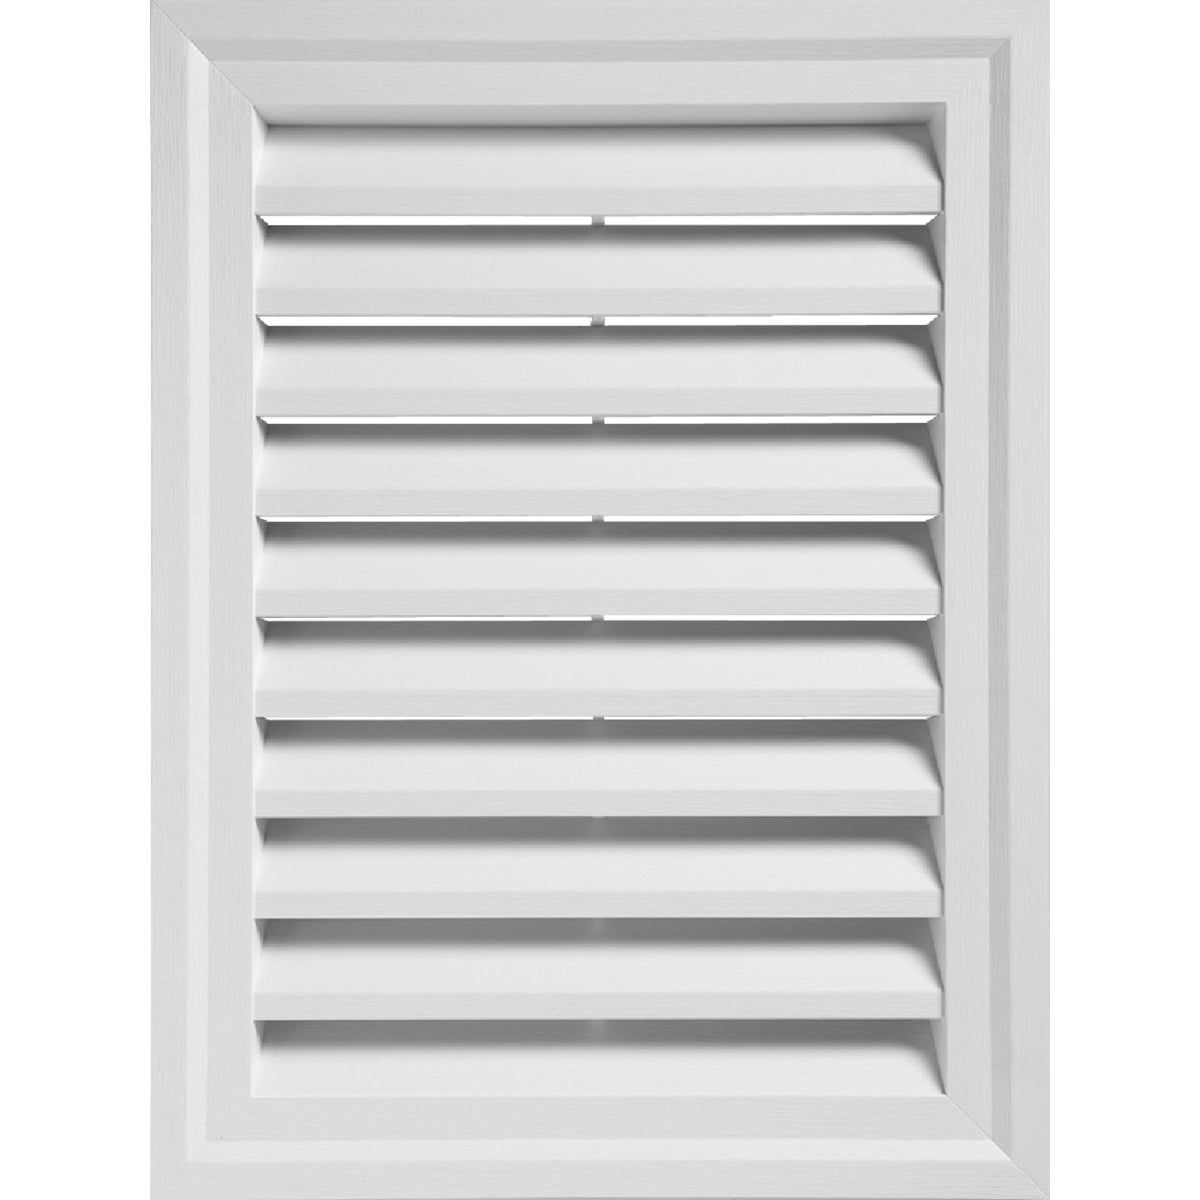 Item 112321, The rectangular gable vent is used to vent the attic.